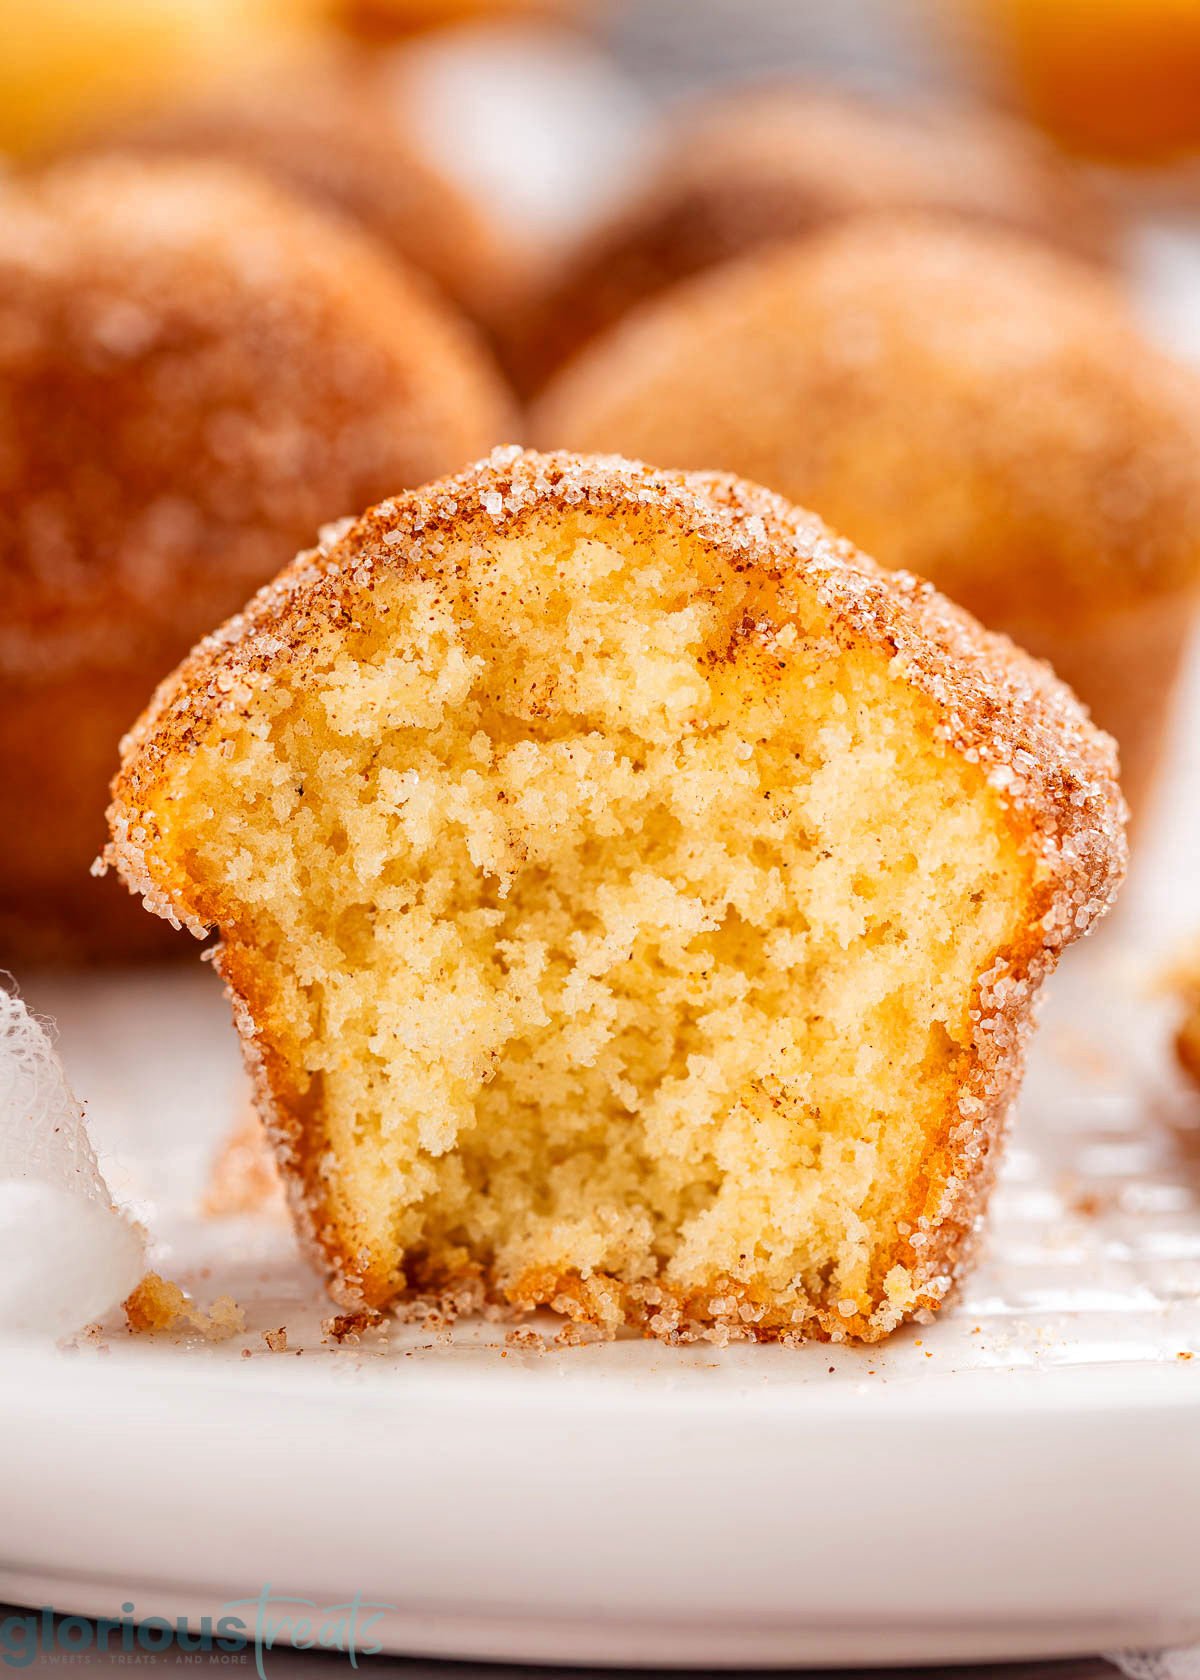 half of a muffin sitting on a white plate showing the beautiful tender crumb and cinnamon sugar coating.